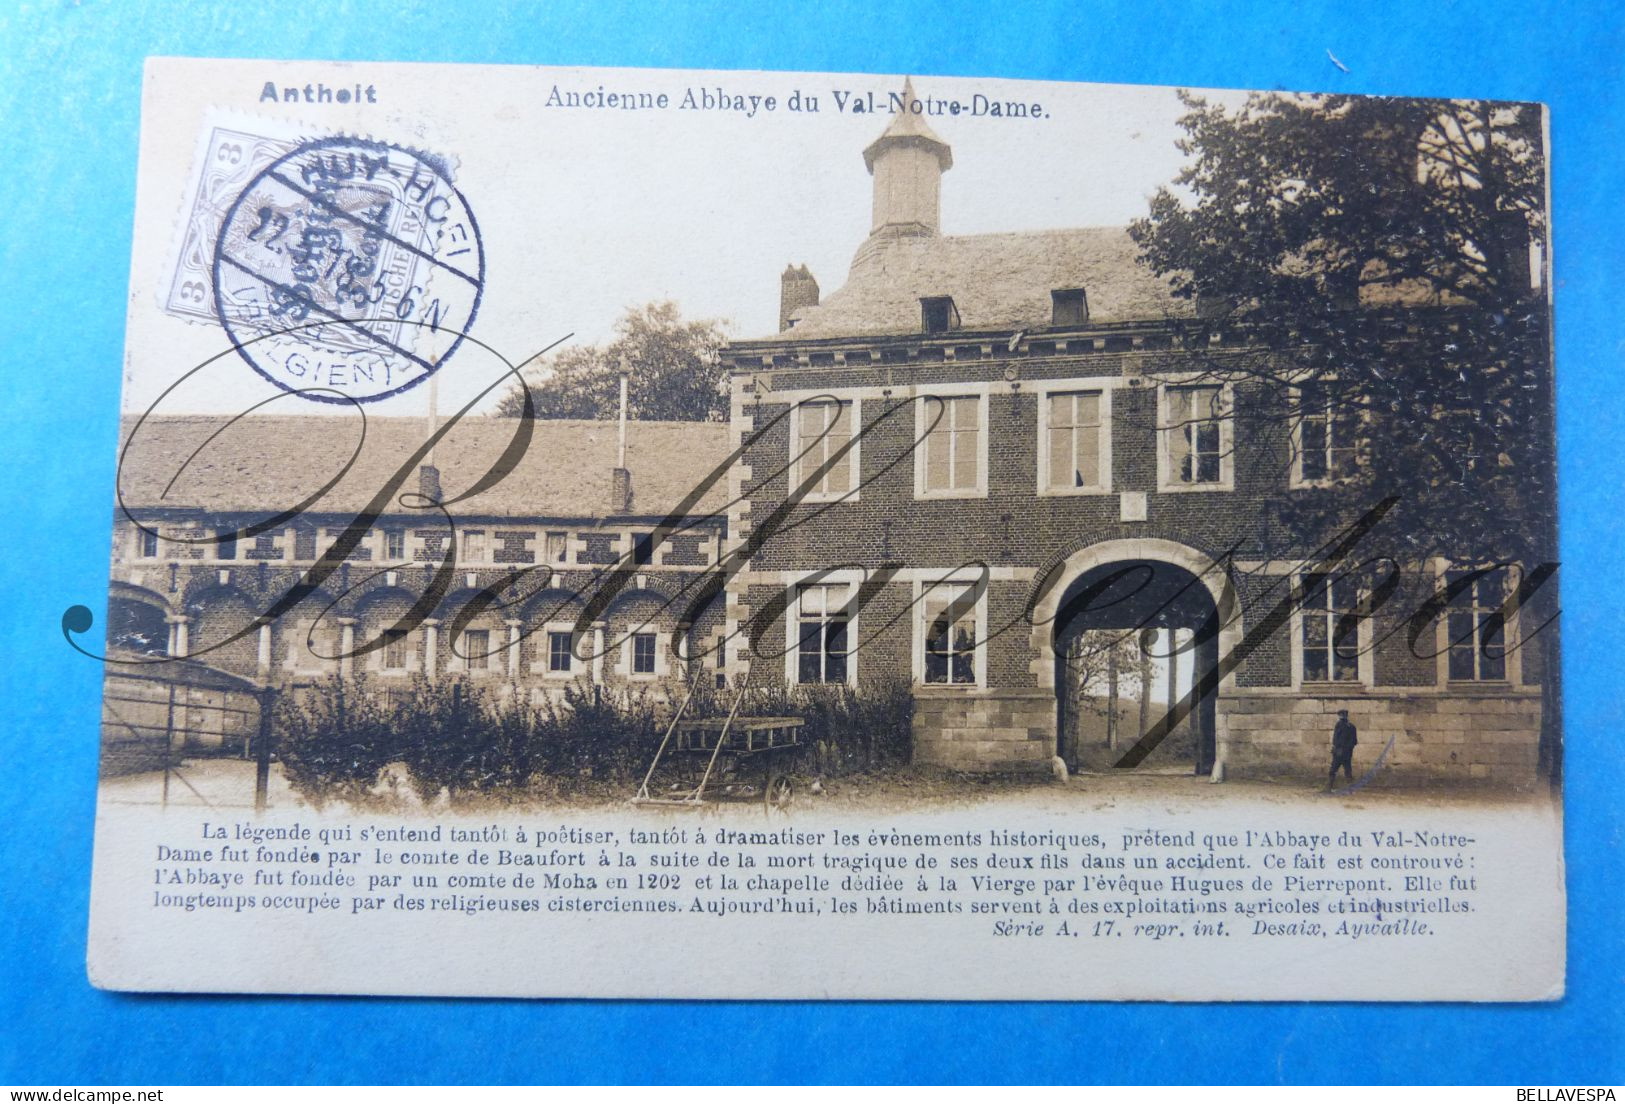 Antheit Abbaye Val-Notre-Dame Feldpost  Occupation Huy 1918 - Wanze